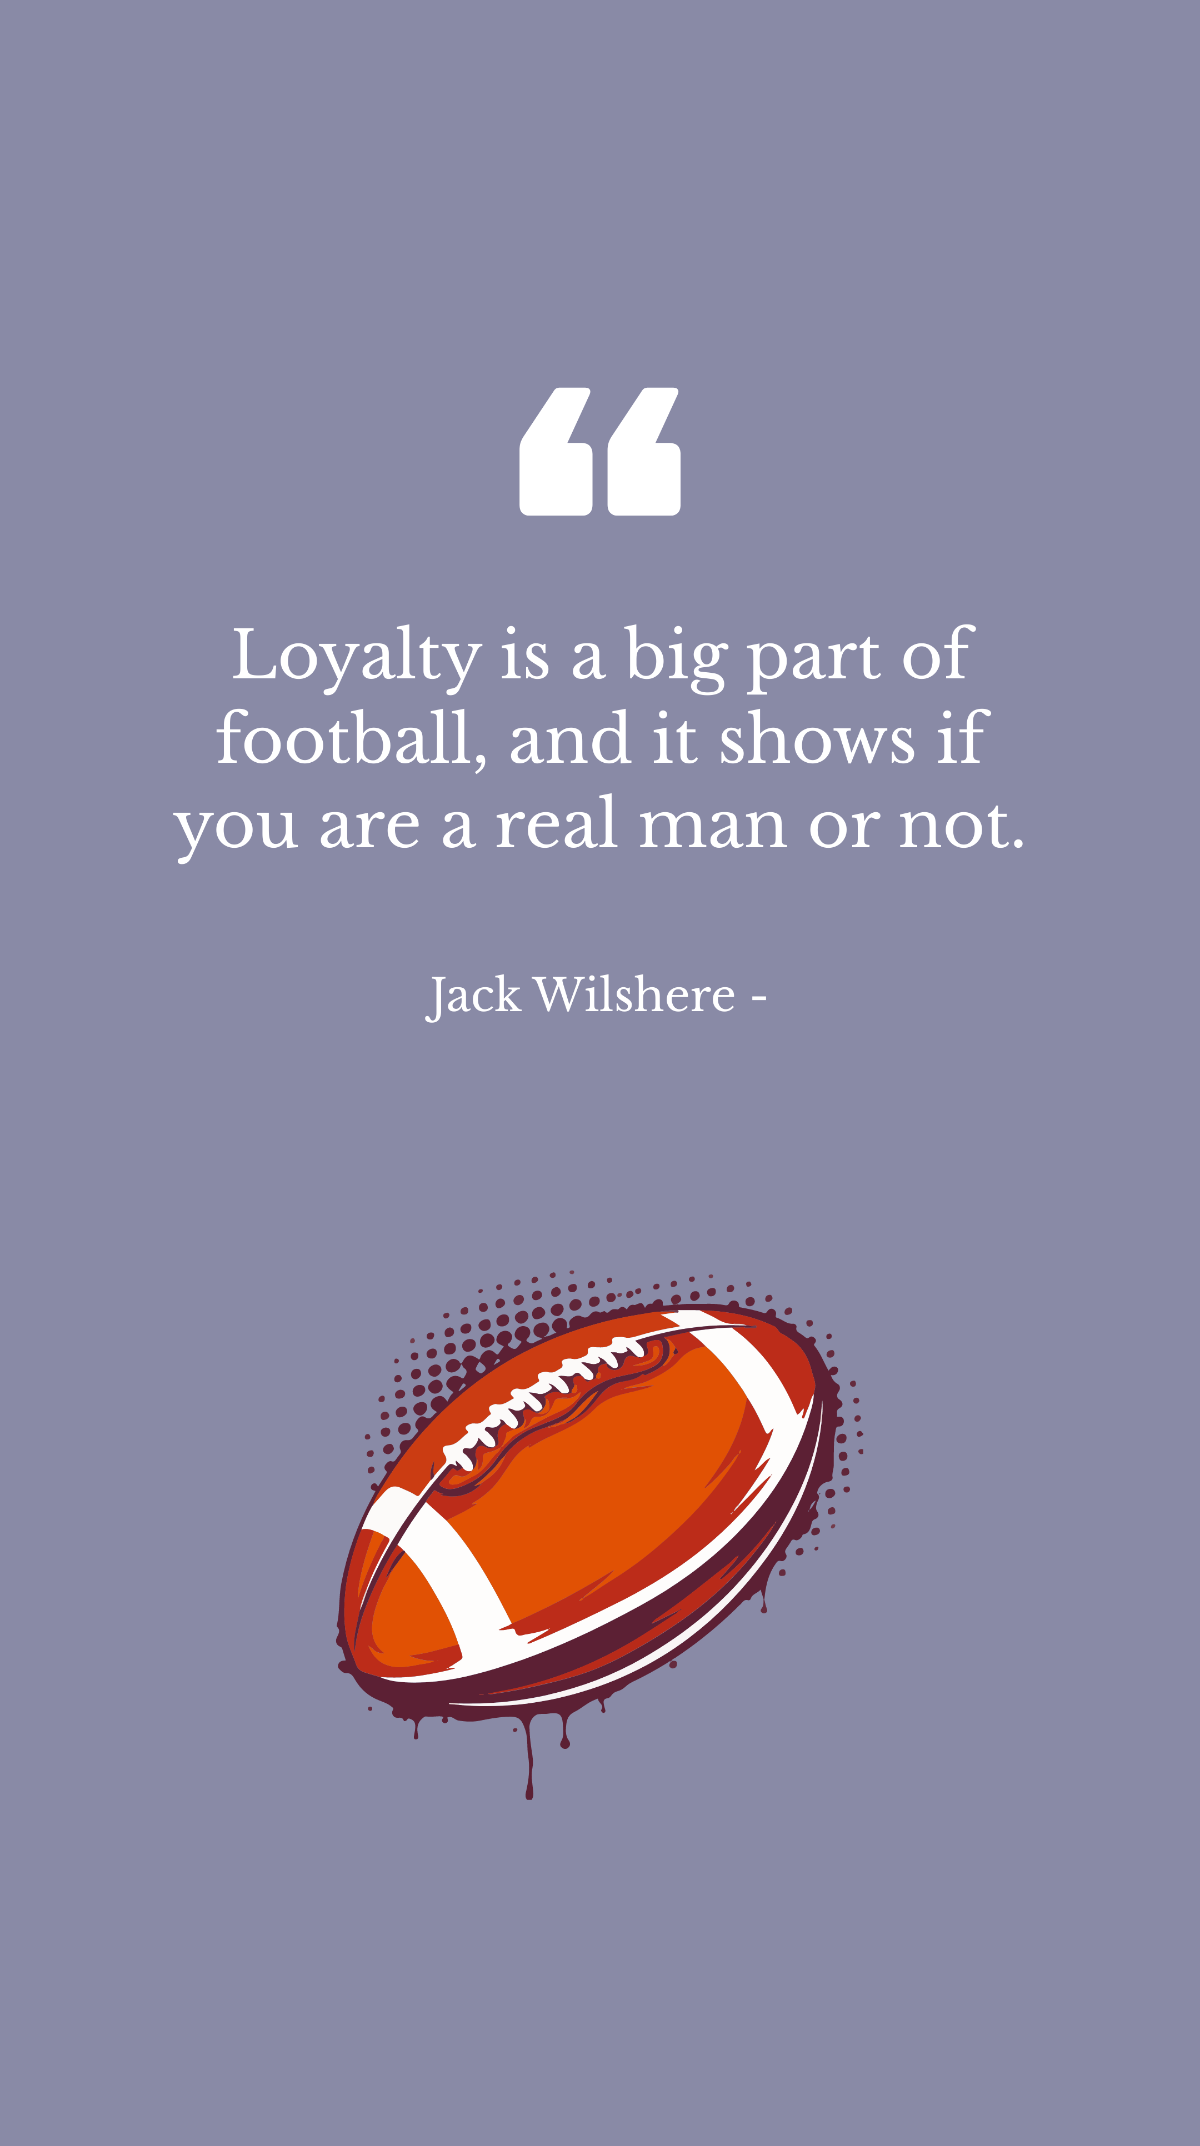 Jack Wilshere - Loyalty is a big part of football, and it shows if you are a real man or not. Template